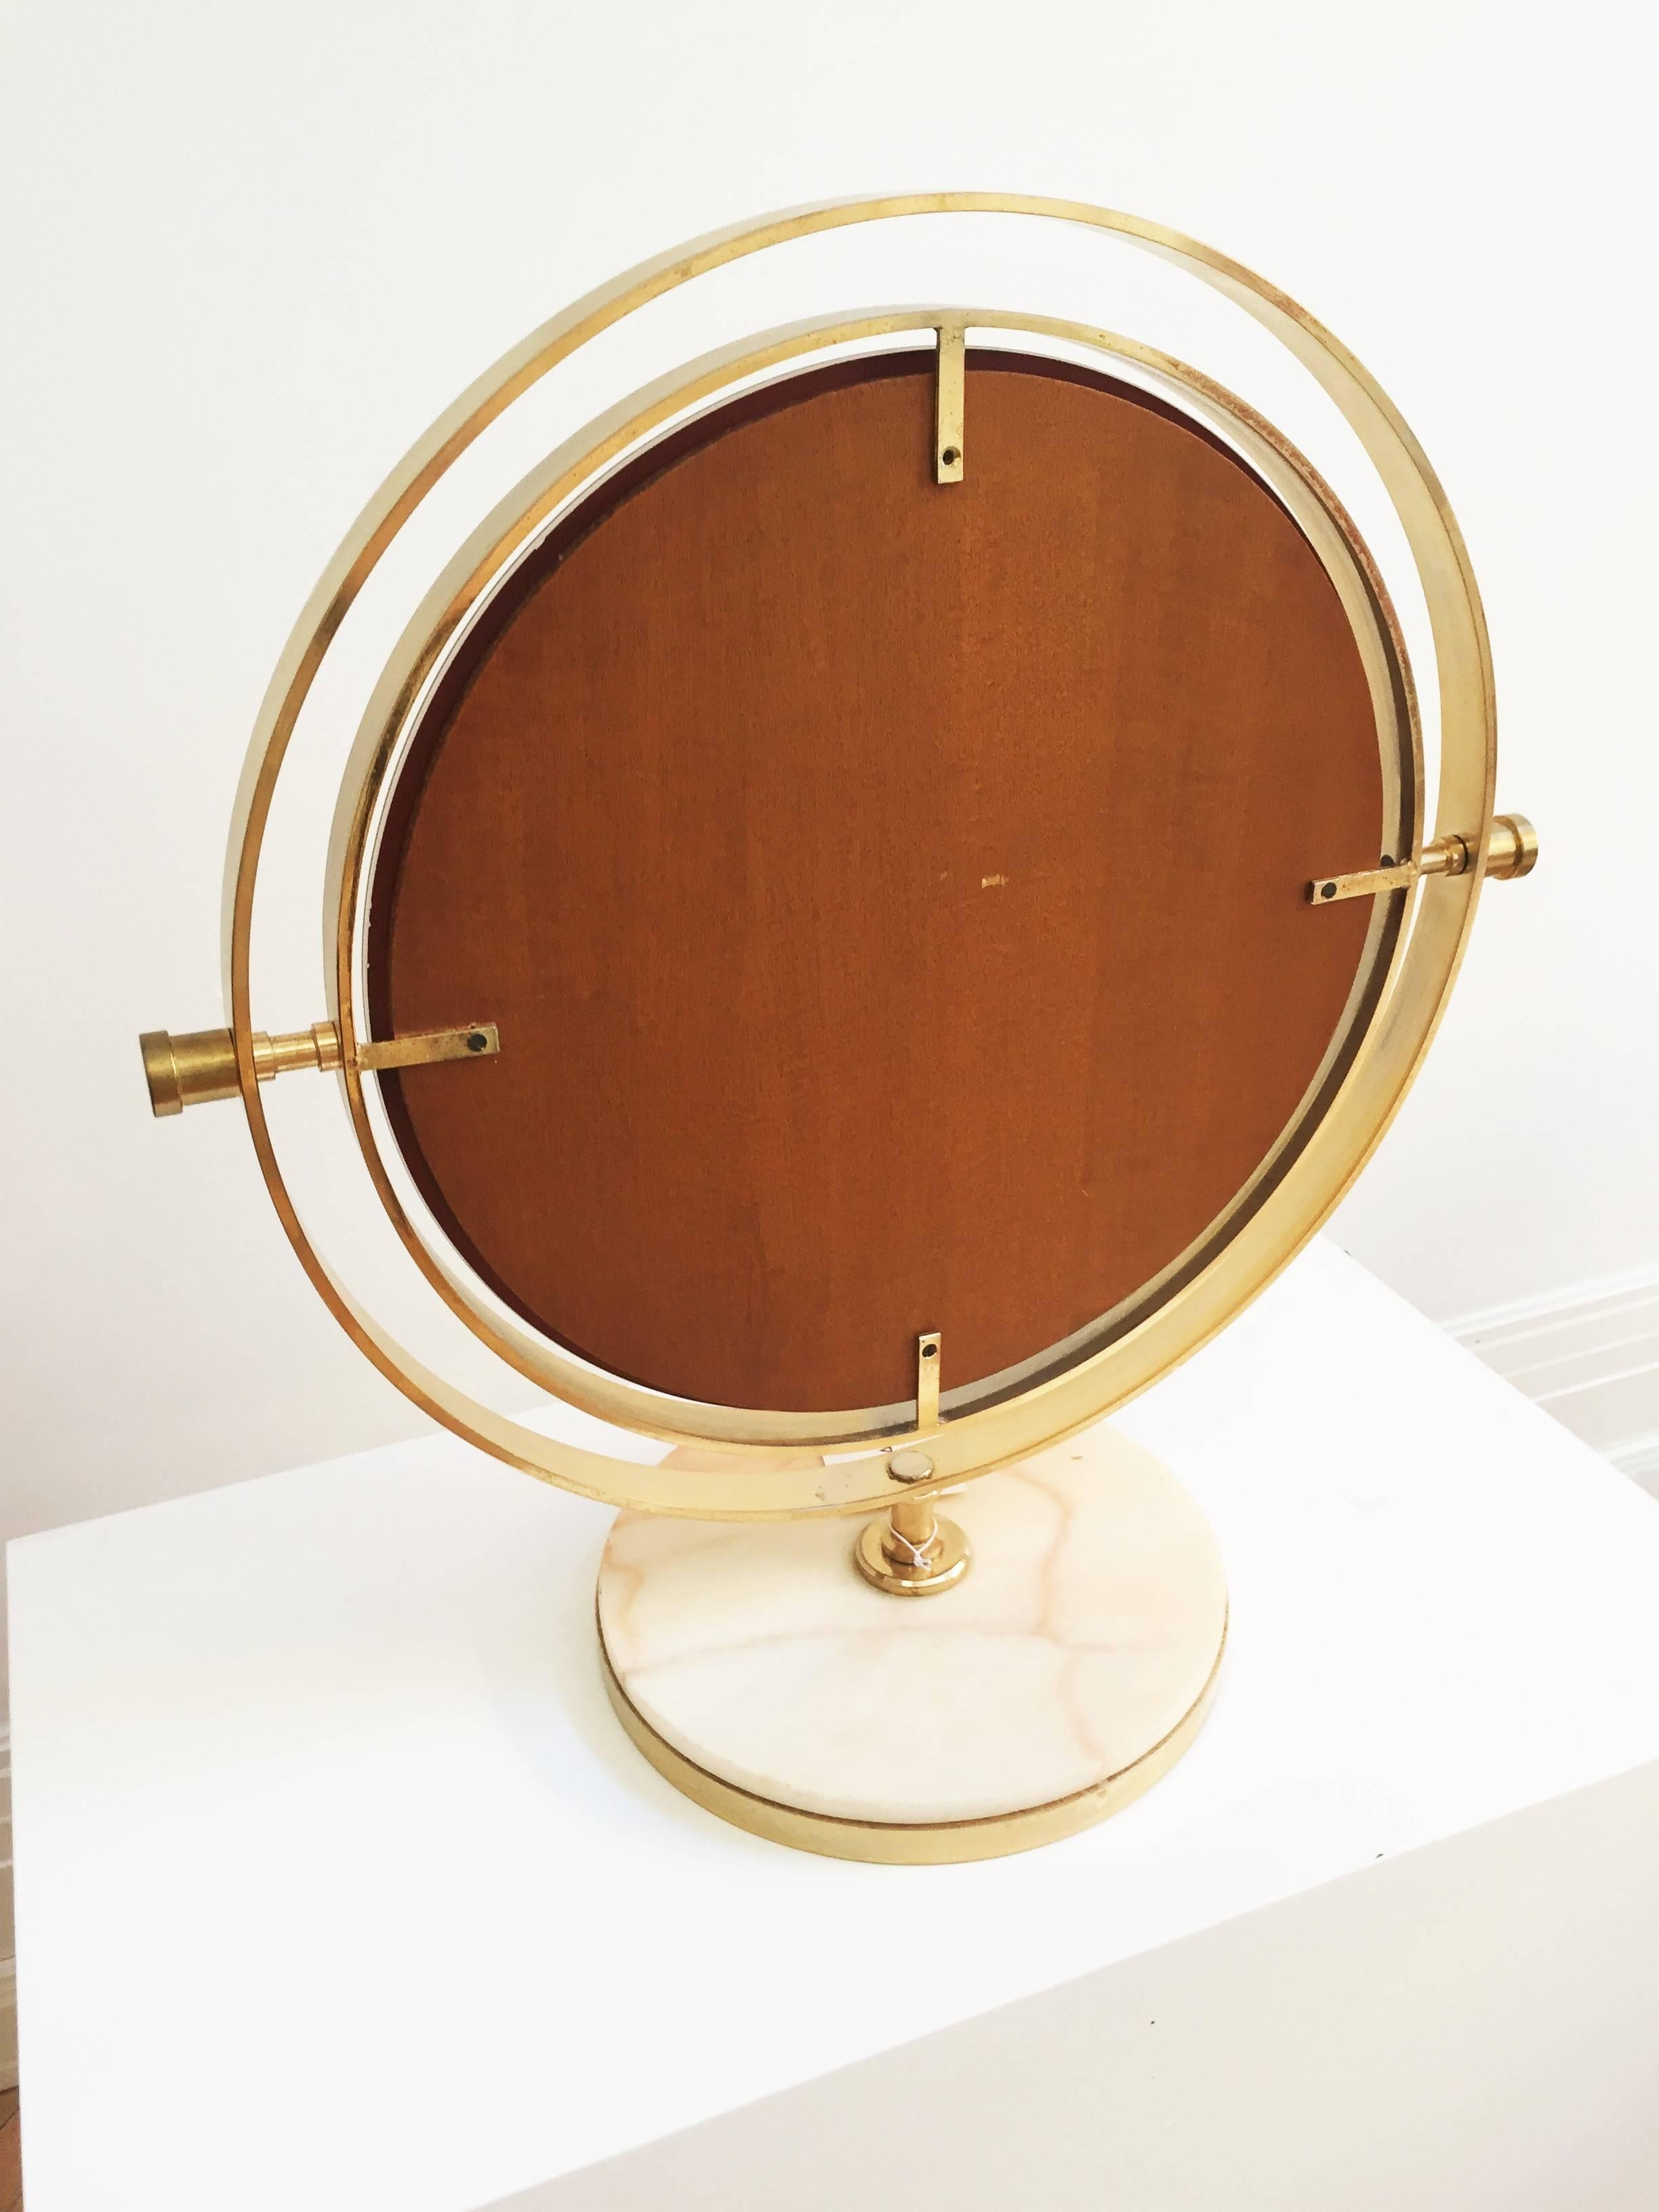 Rare 1950s quality brass and marble, swivel Table Mirror Attributed to Sergio Mazza. This rare mirror has over-sized proportions giving it the wow factor.
Engineered in high quality brass with a cream marble base. The diameter of the base is 30 cm